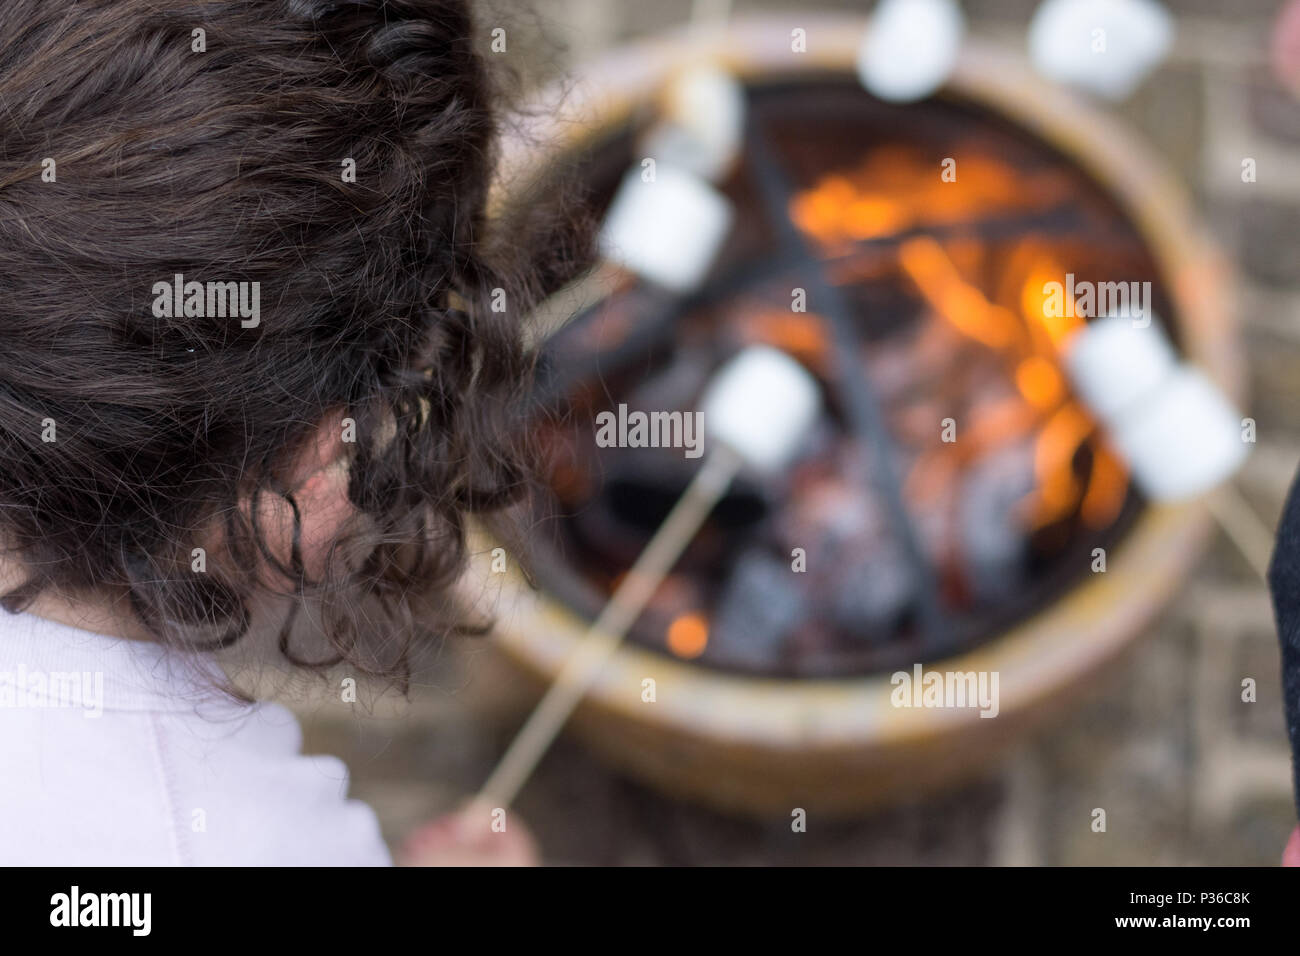 Girl toasting mash mallows sur open fire pit at garden party Banque D'Images